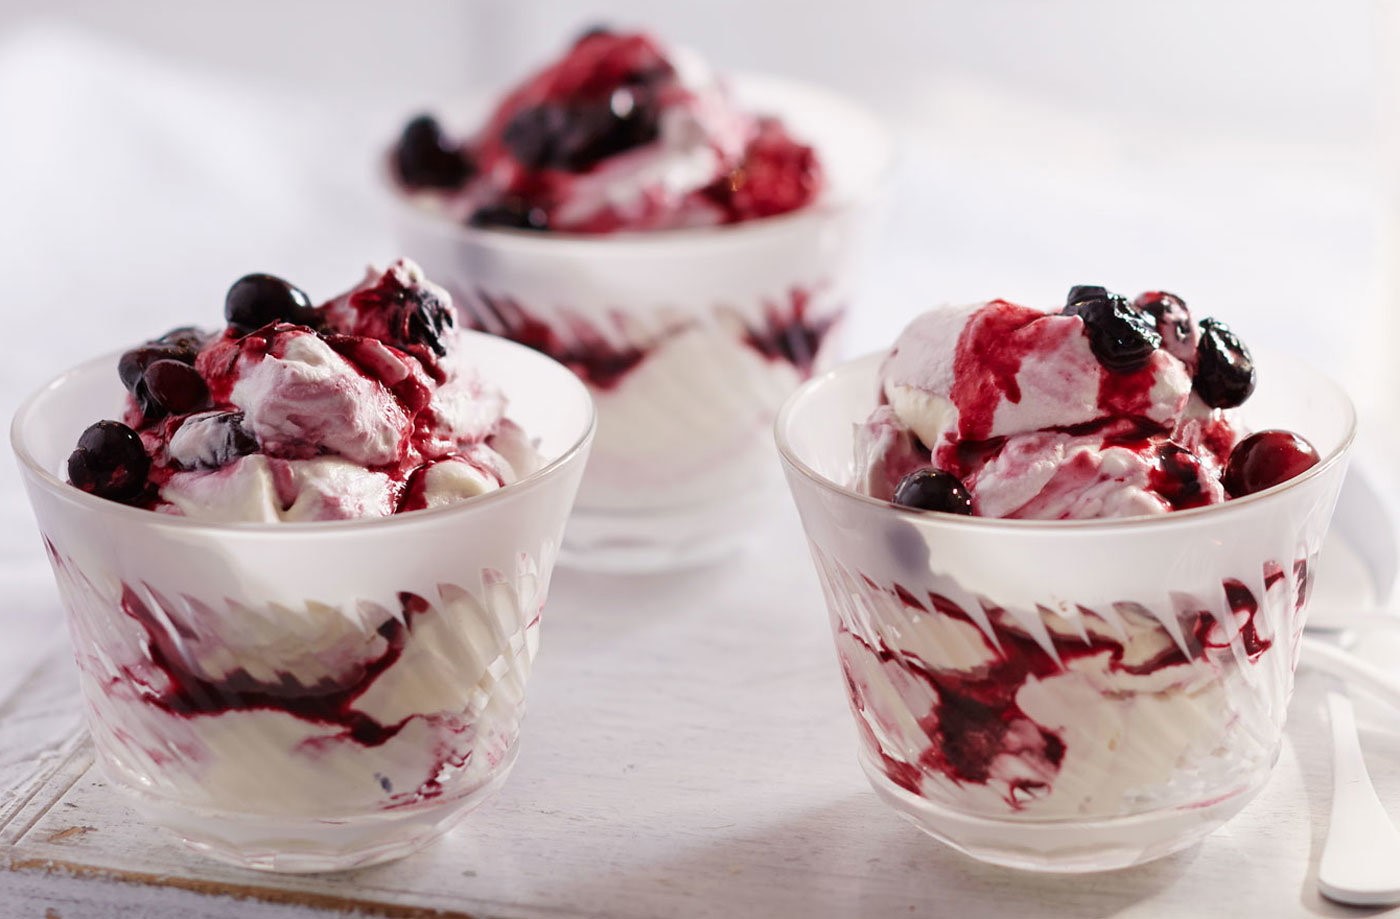 Summer Berry Fool Recipe - A Refreshing and Easy Dessert for the Season